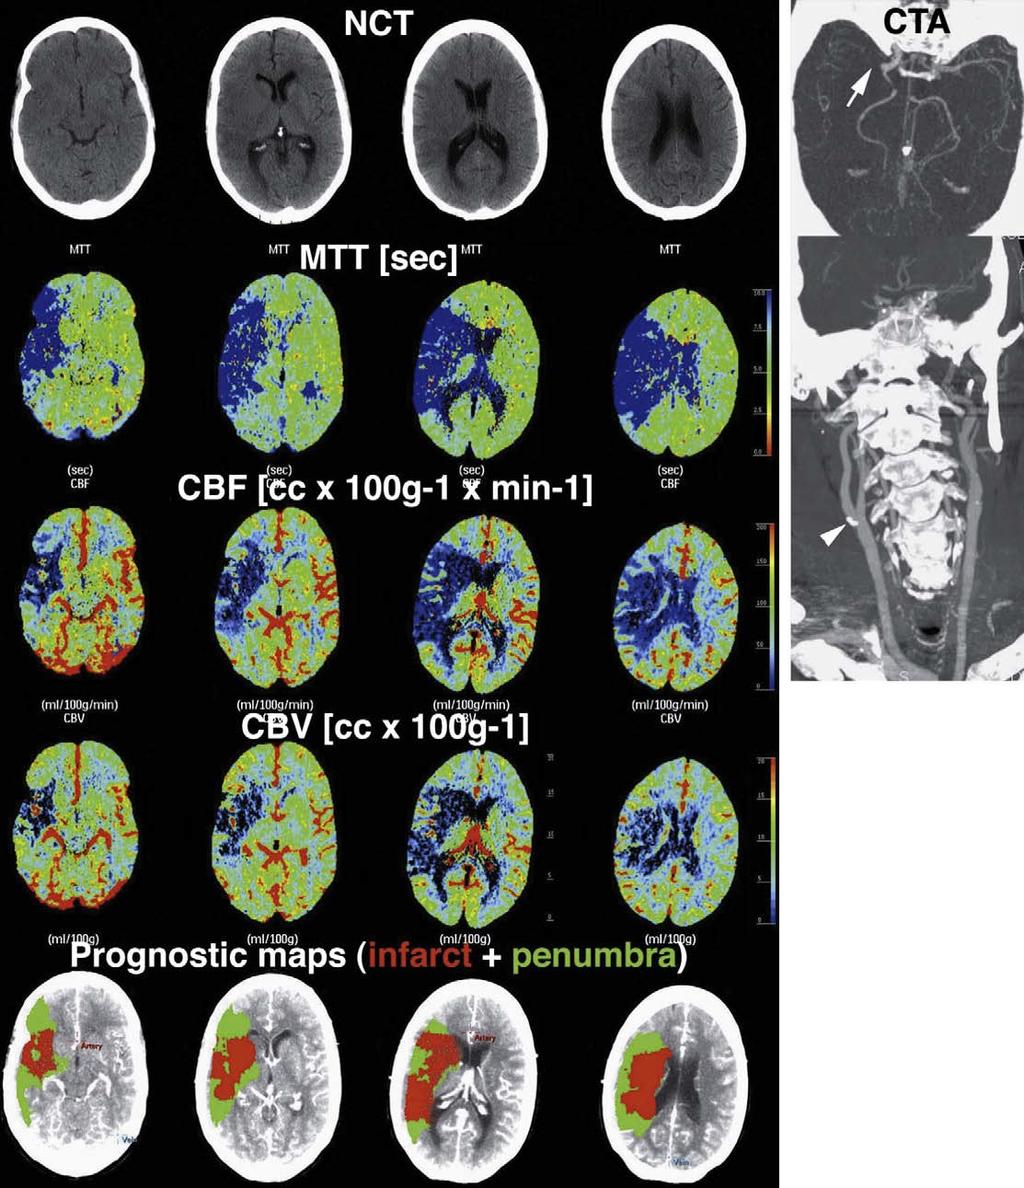 Multimodal BT A 57 year-old male with a right MCA syndrome underwent CT.